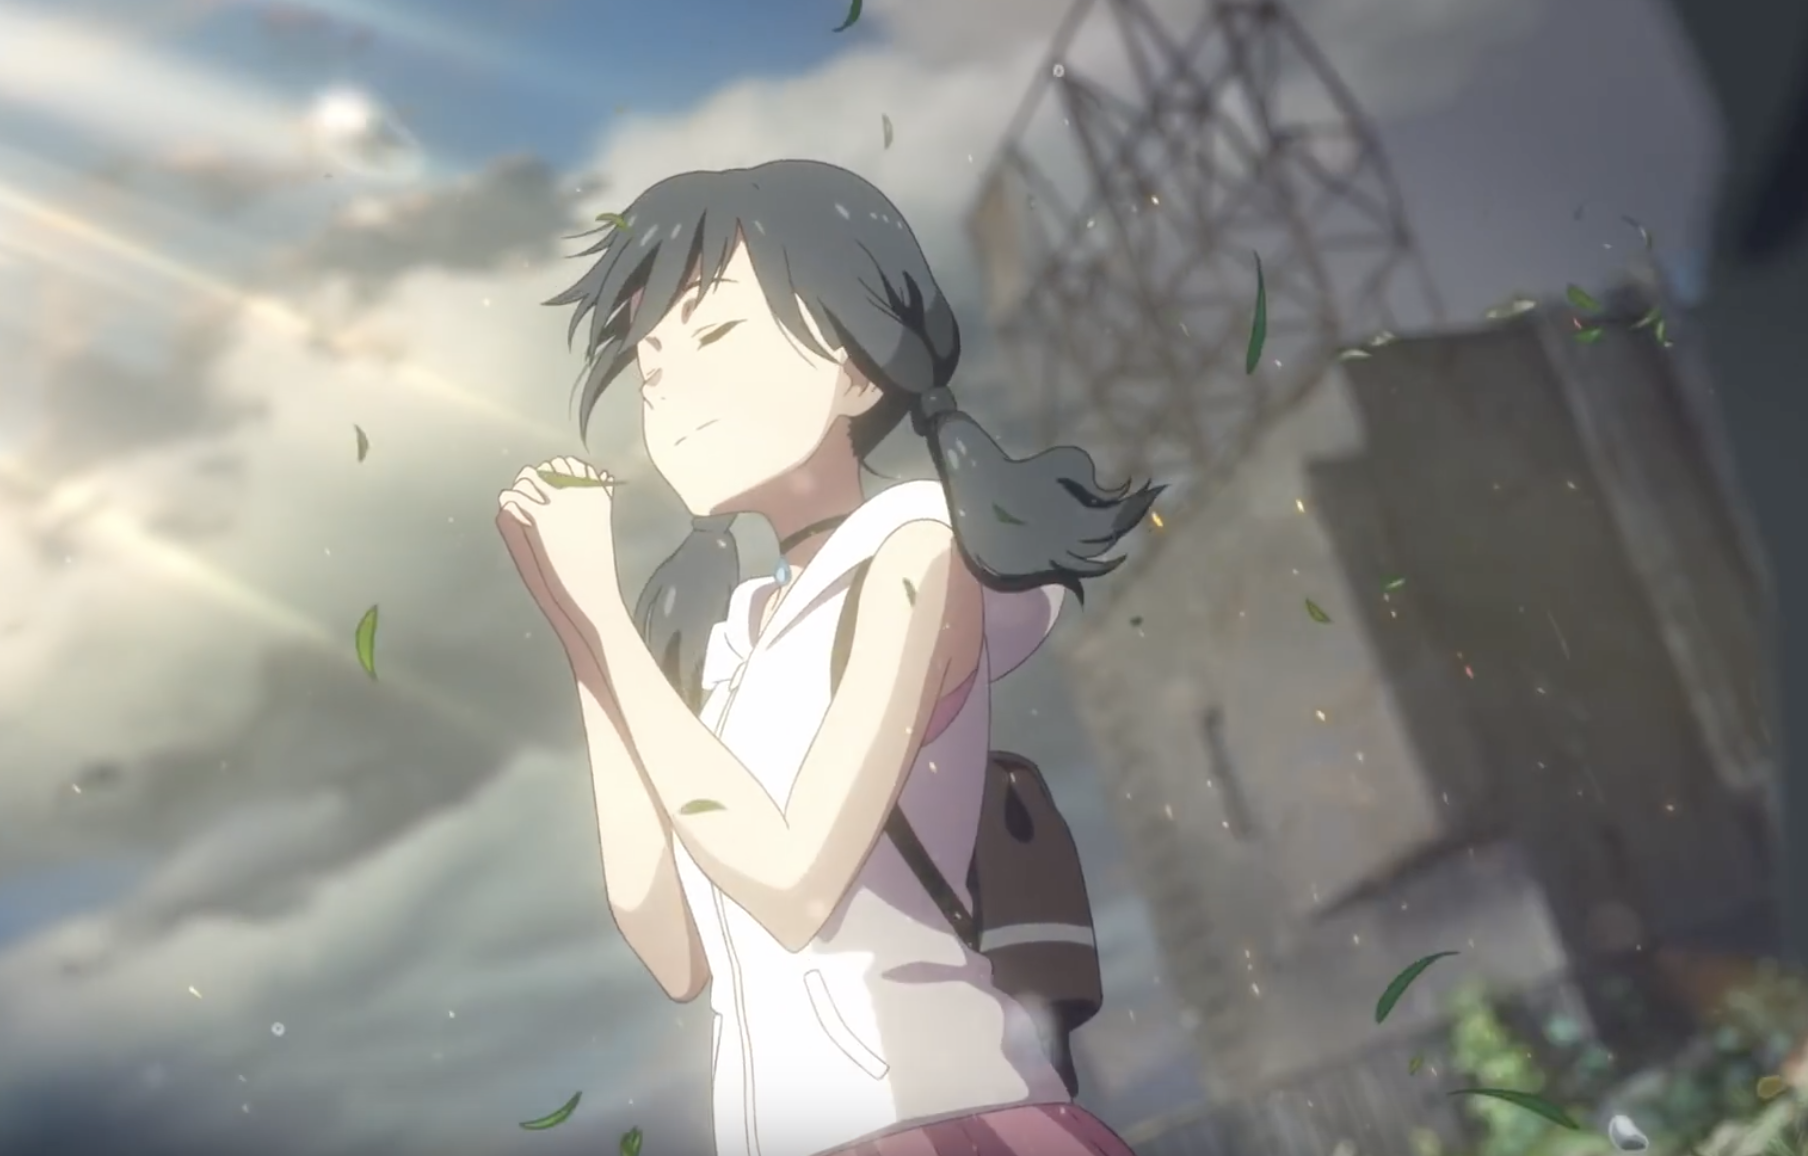 Your Name Director’s Next Film Gets A Trailer And Poster